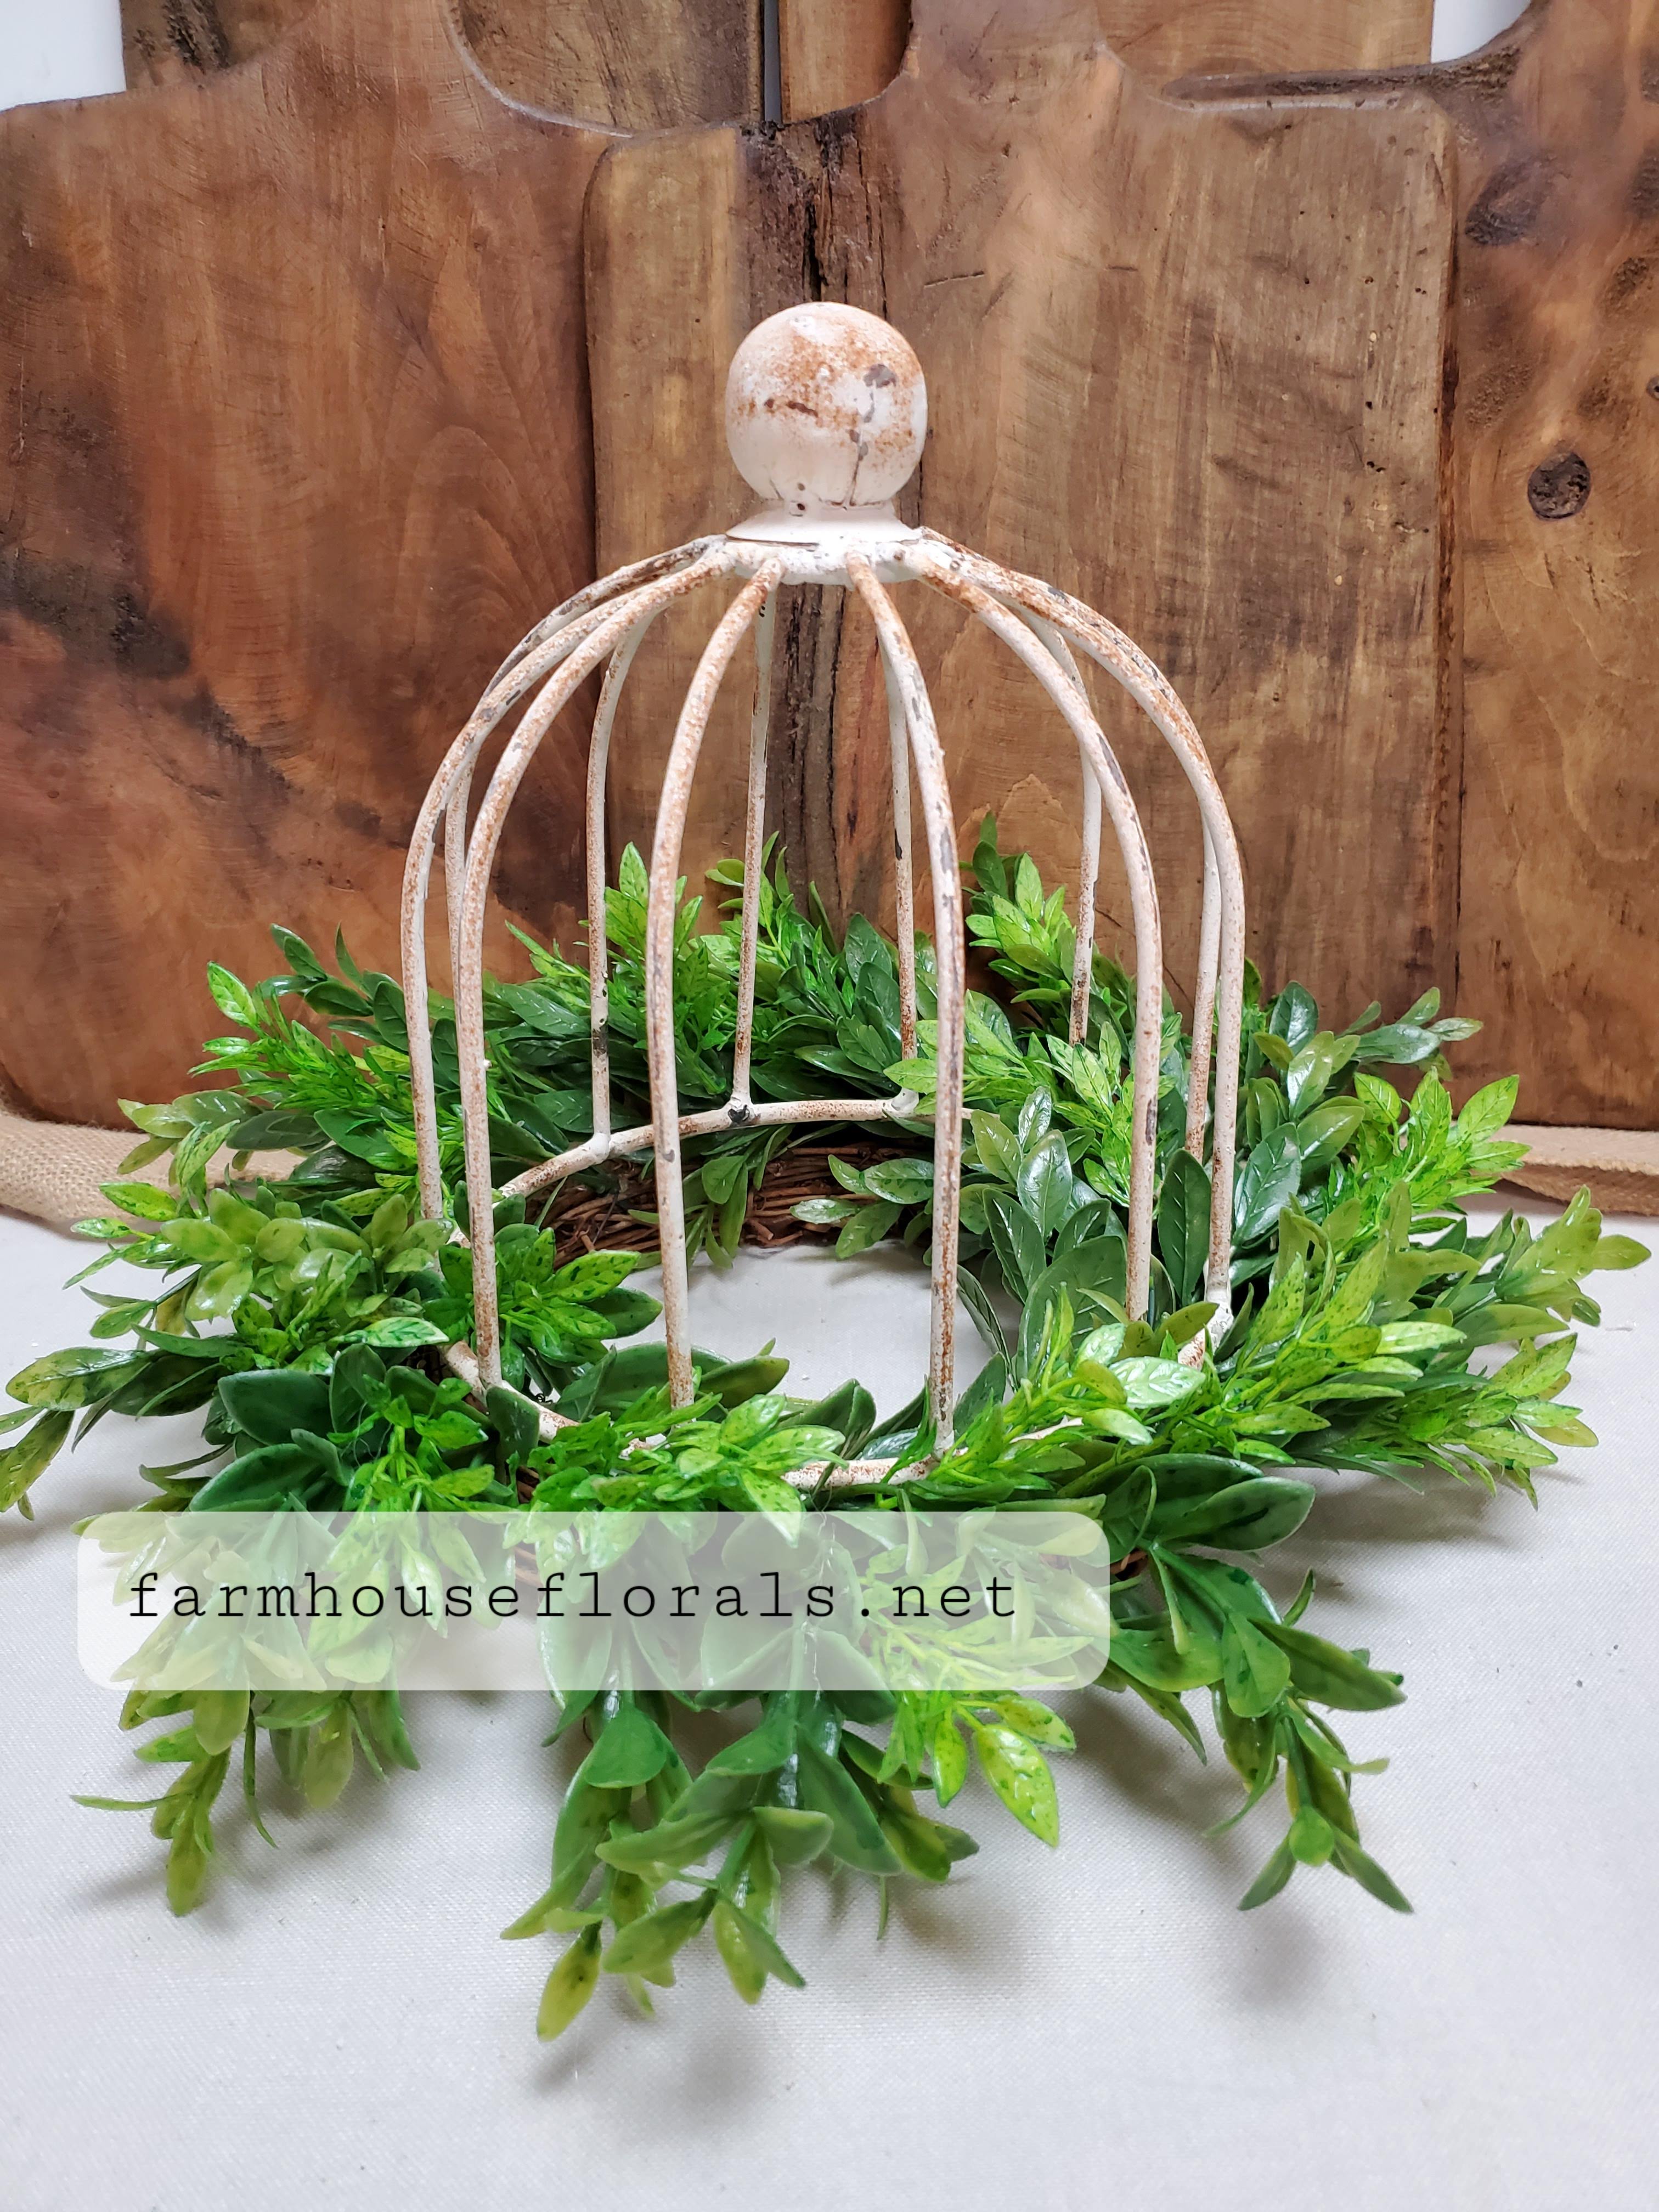 Small Metal Cloche with Wreath